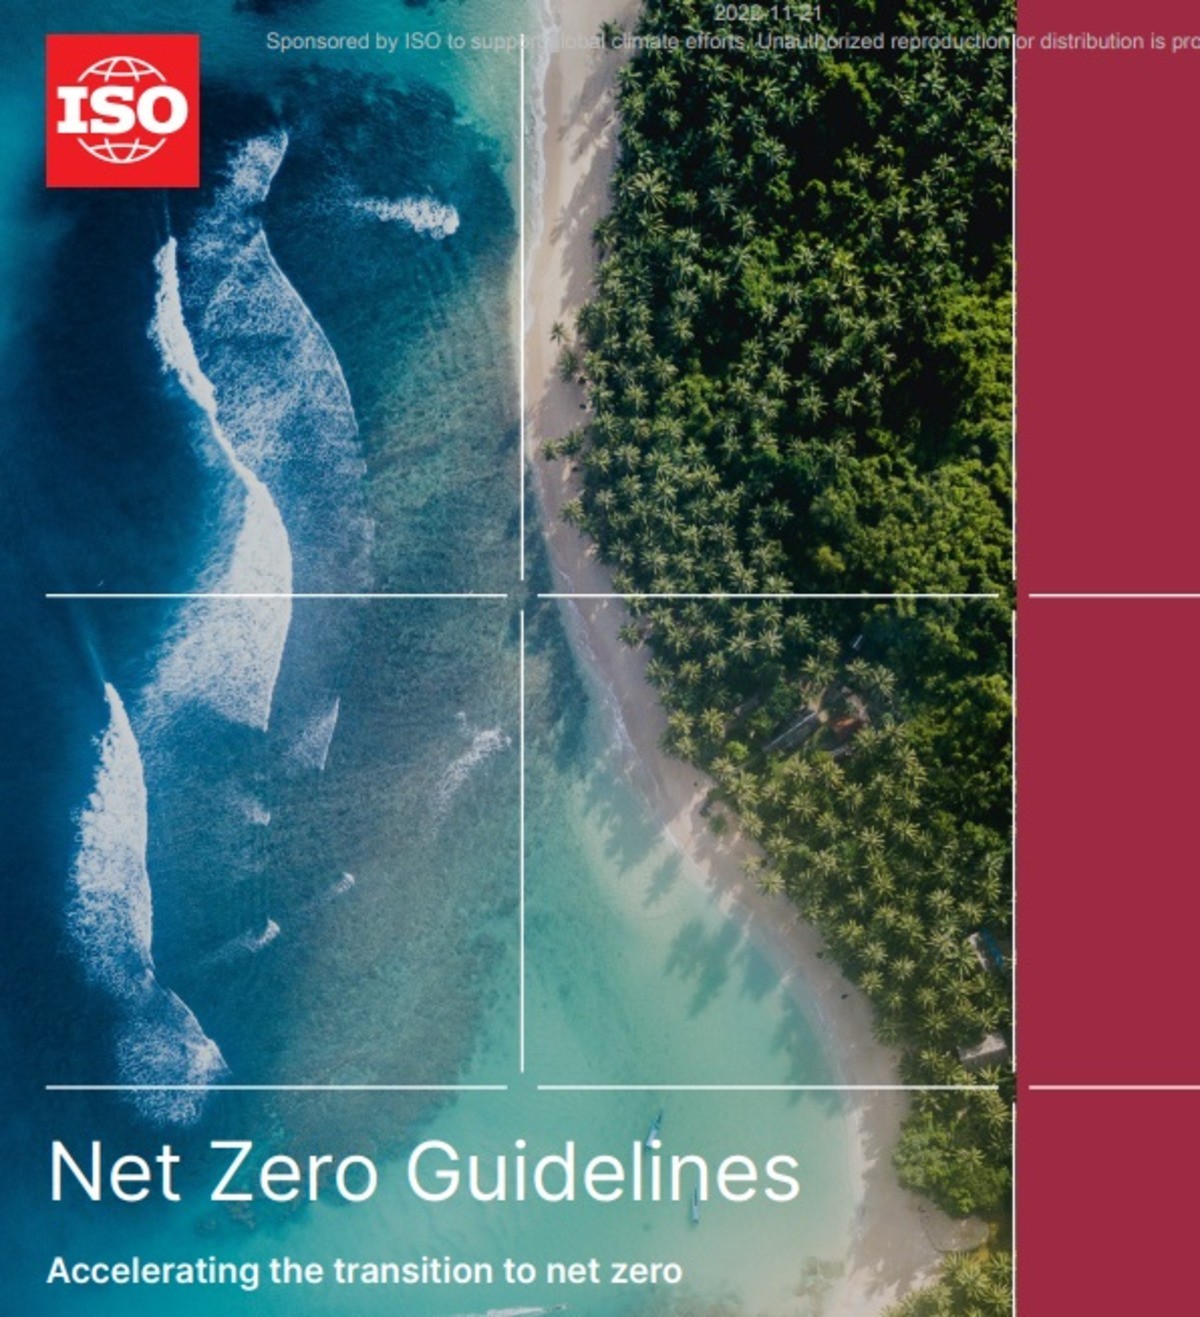 ISO published its Net Zero Guidelines